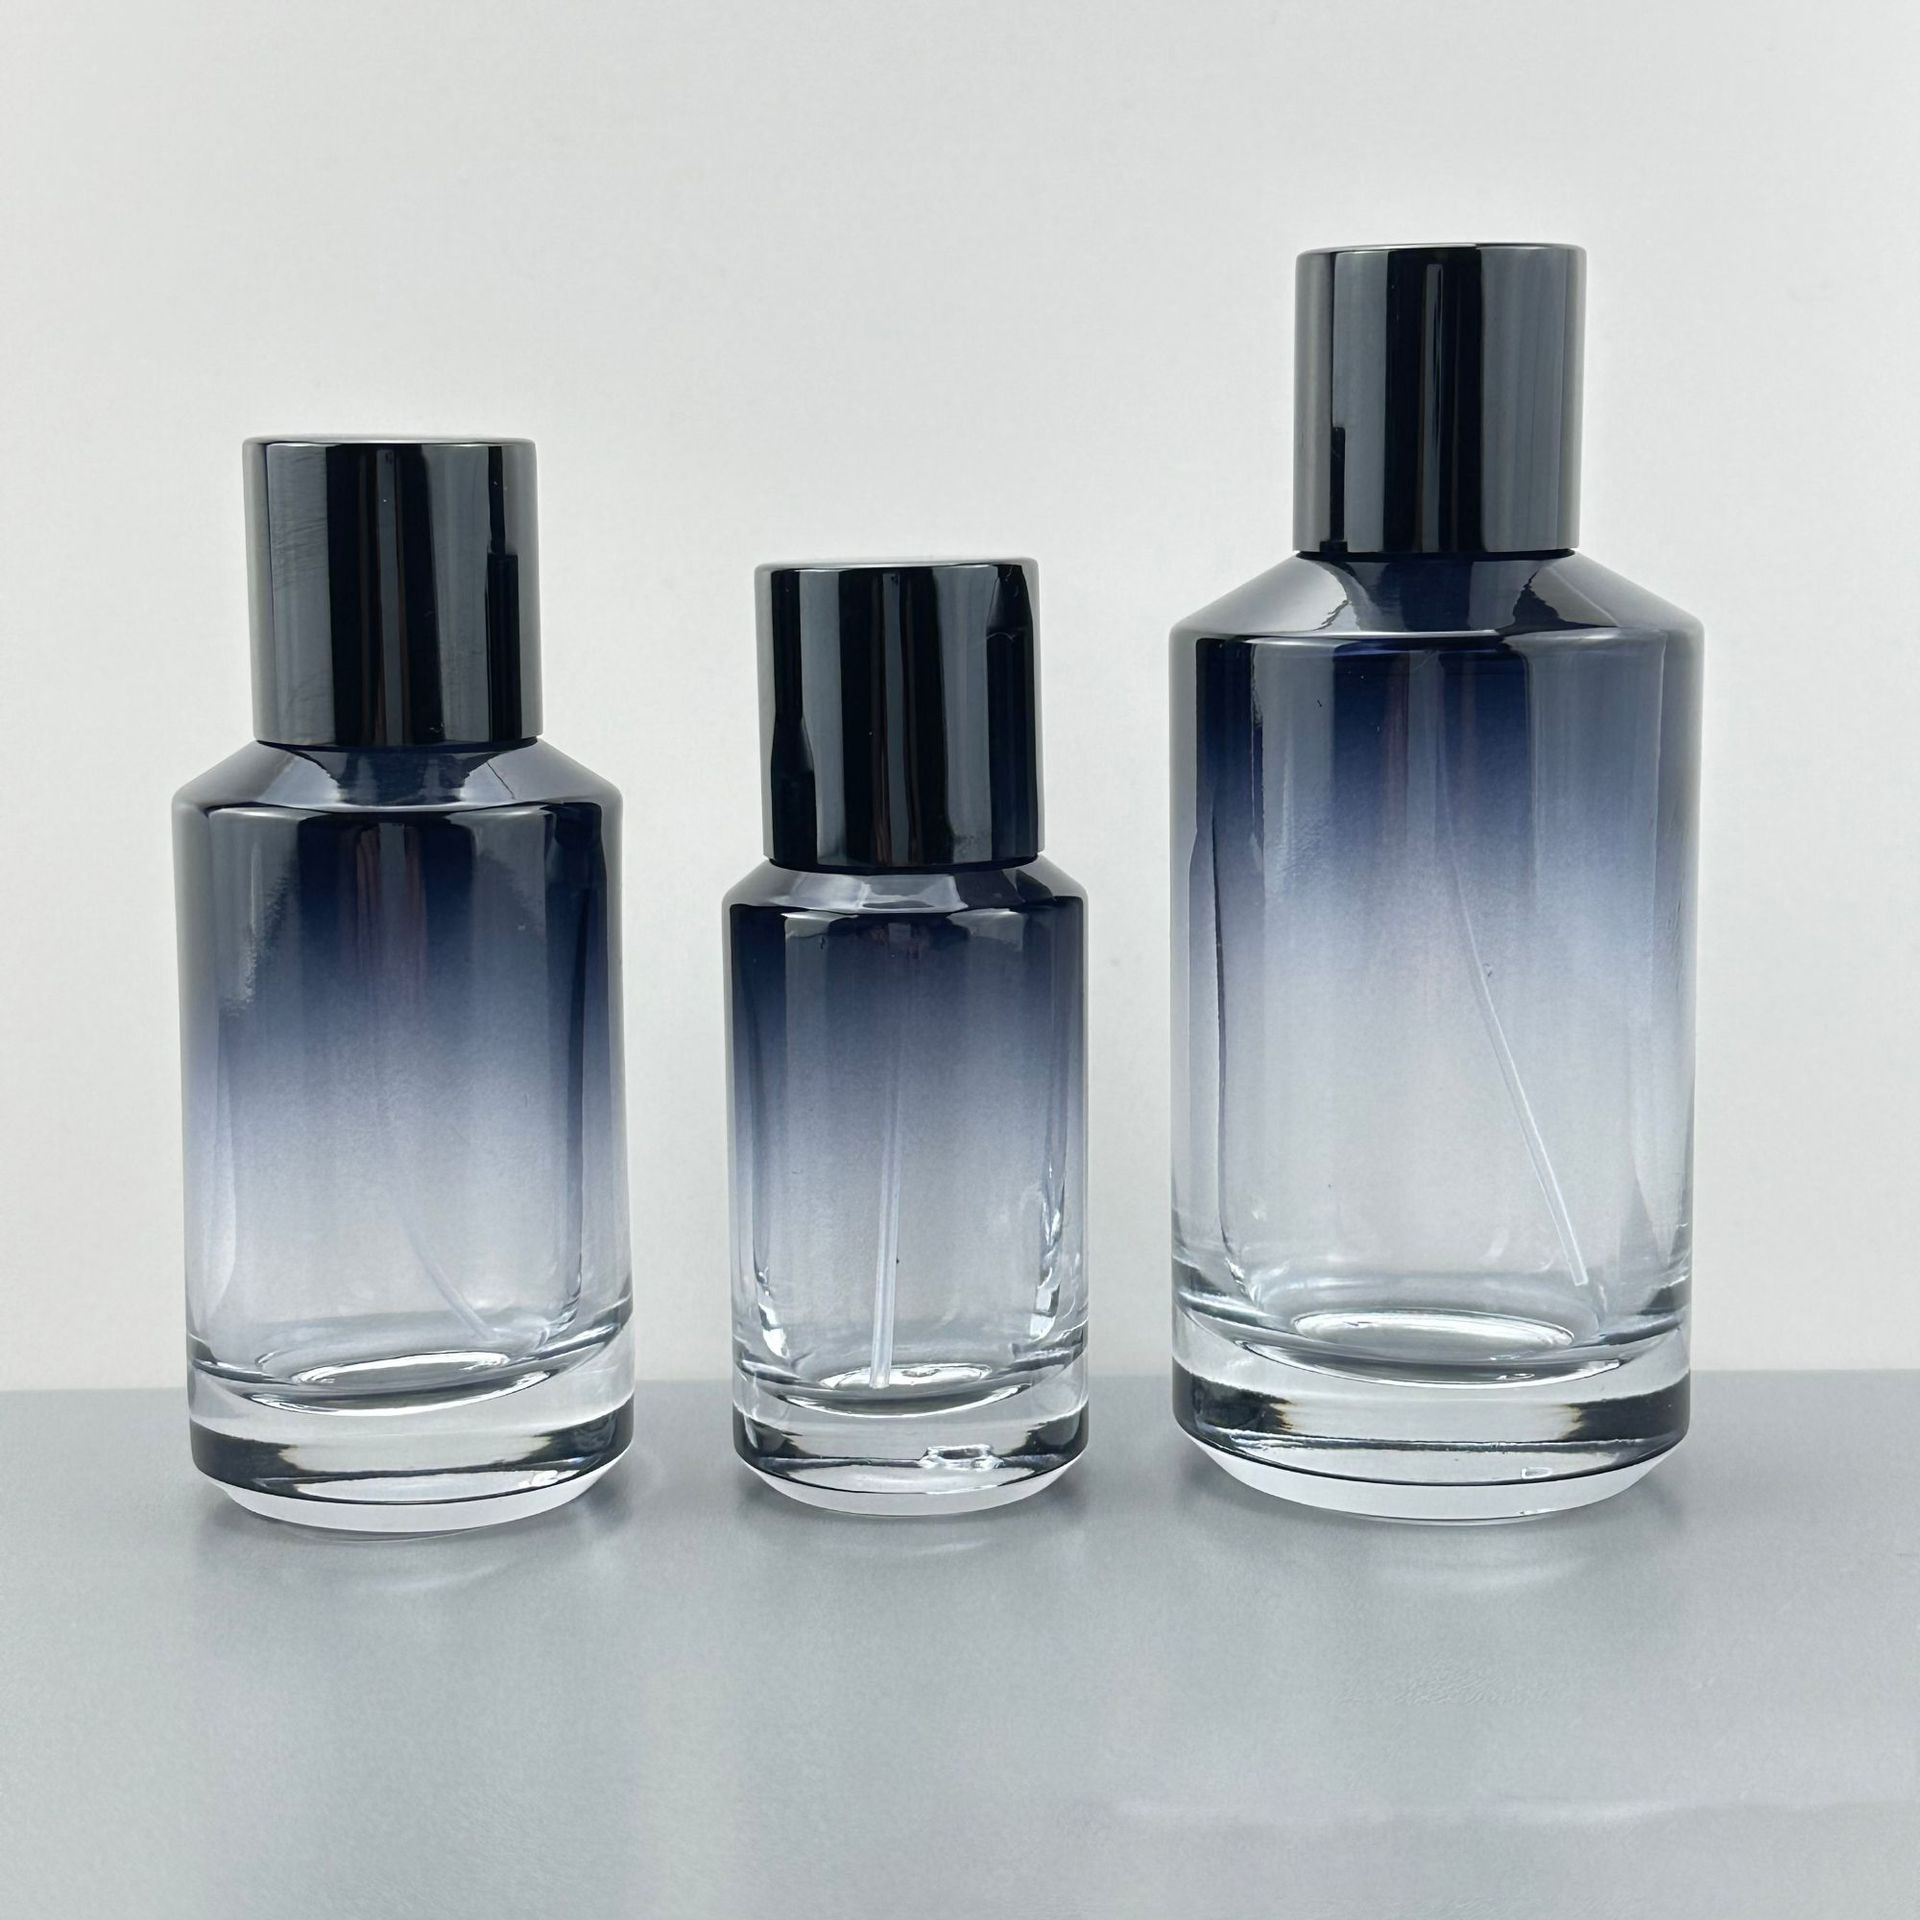 Get your clients' attention with the best perfume bottle design